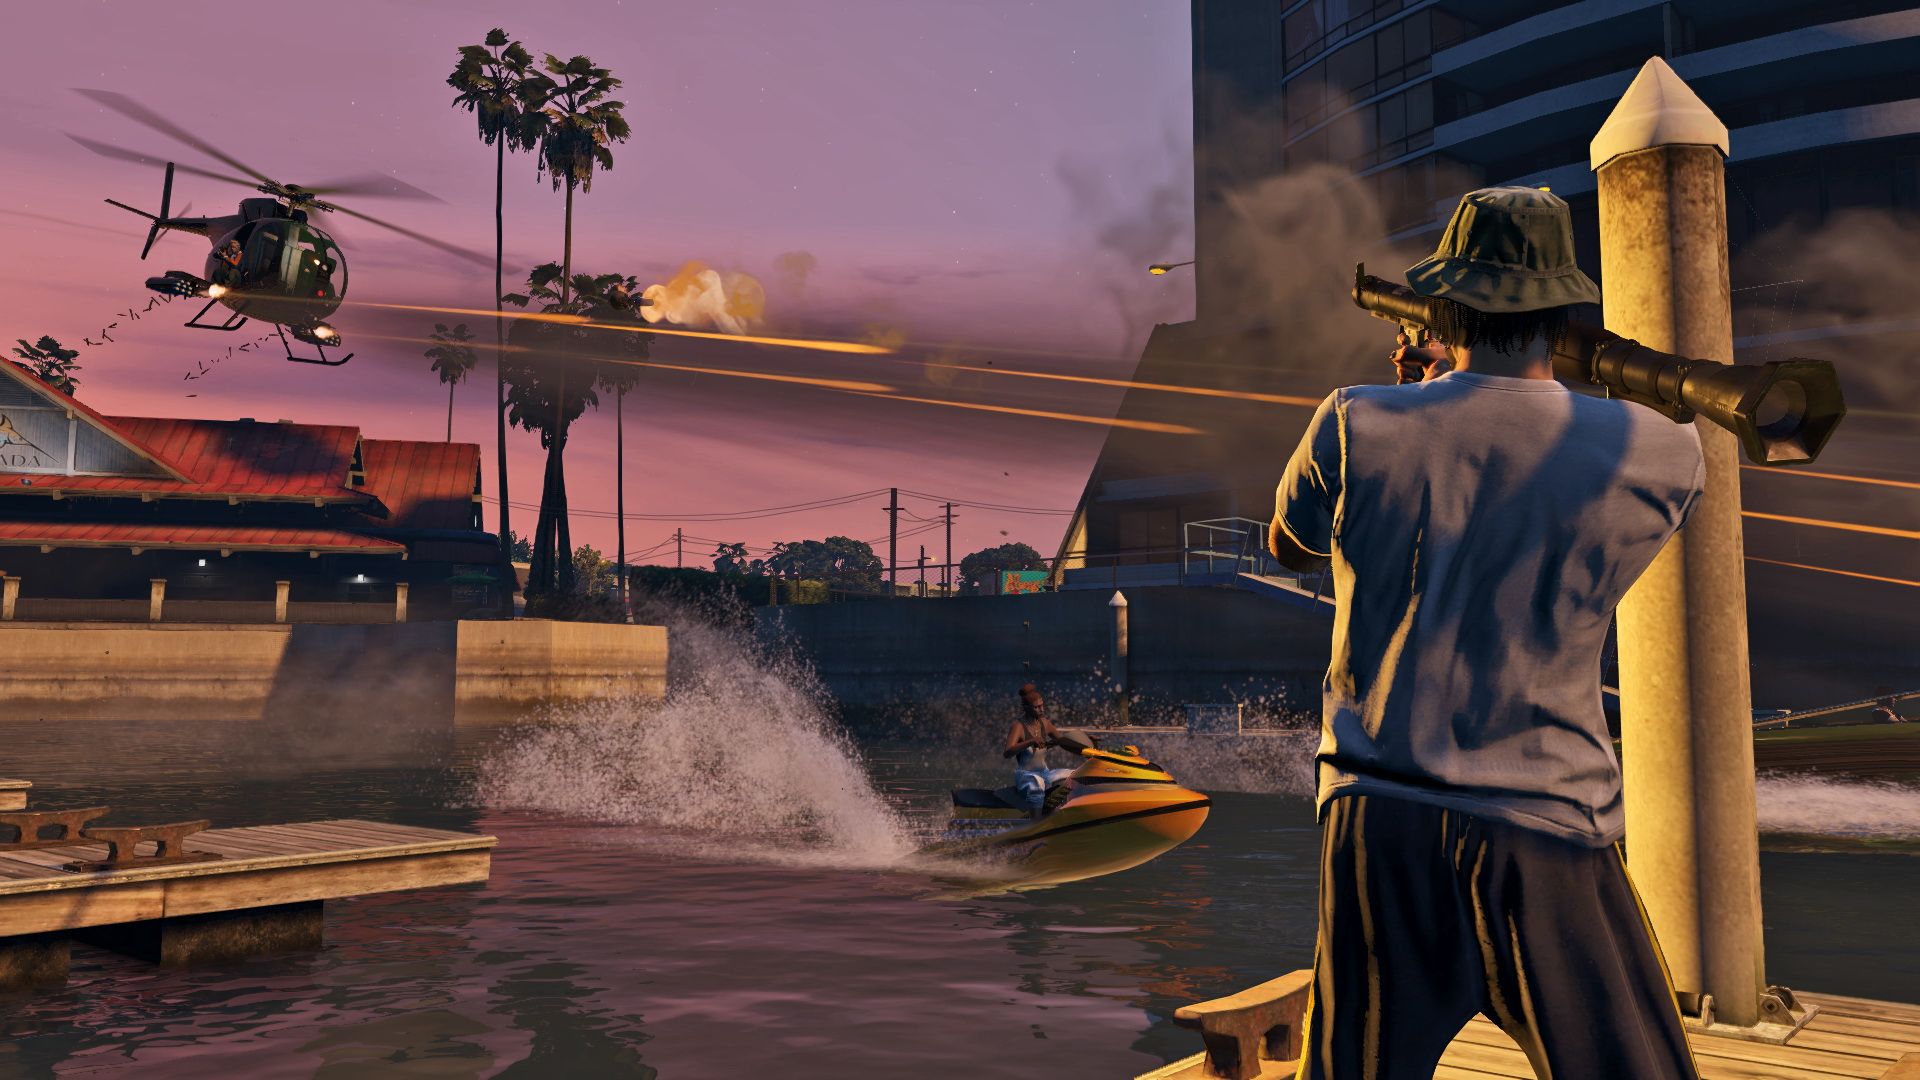 Check Out These New GTA 5 Xbox One PS4 PC Screenshots